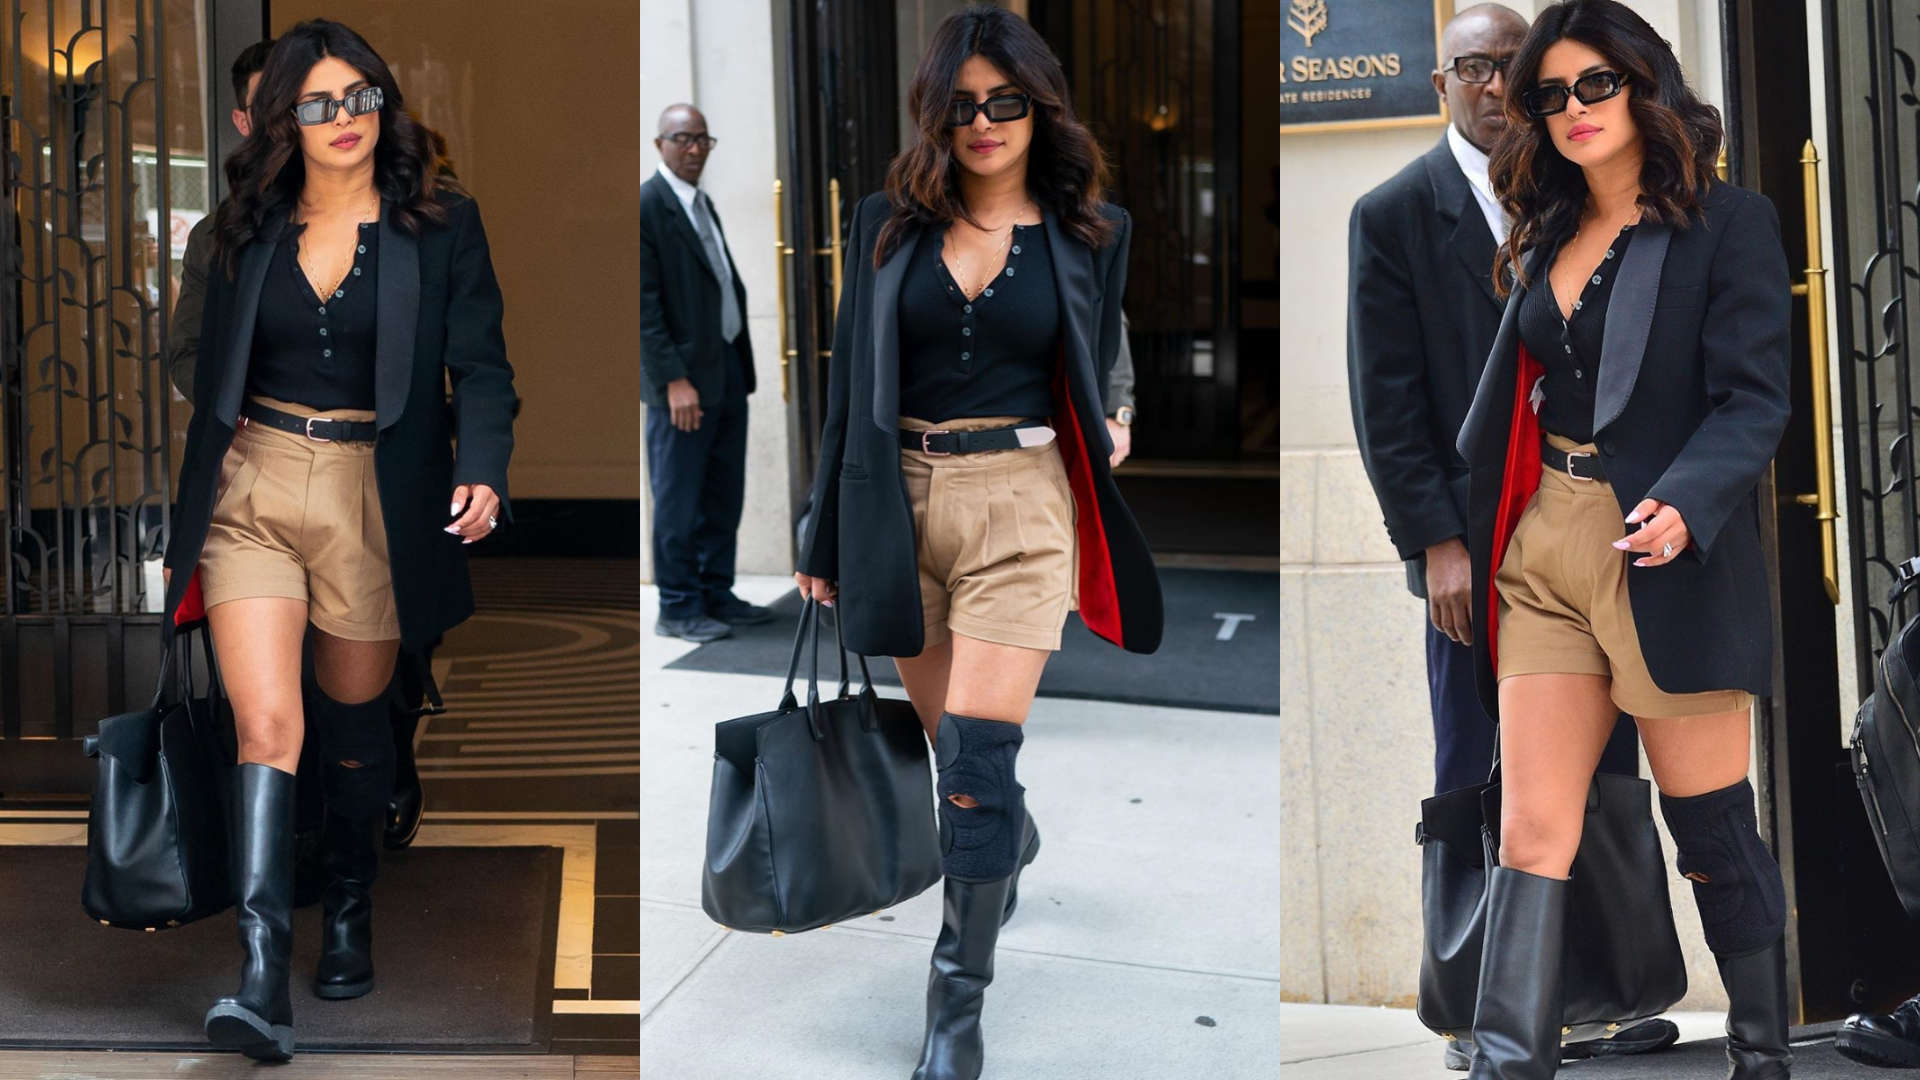 Priyanka Chopra combines khaki shorts with a formal blazer and we are taking notes